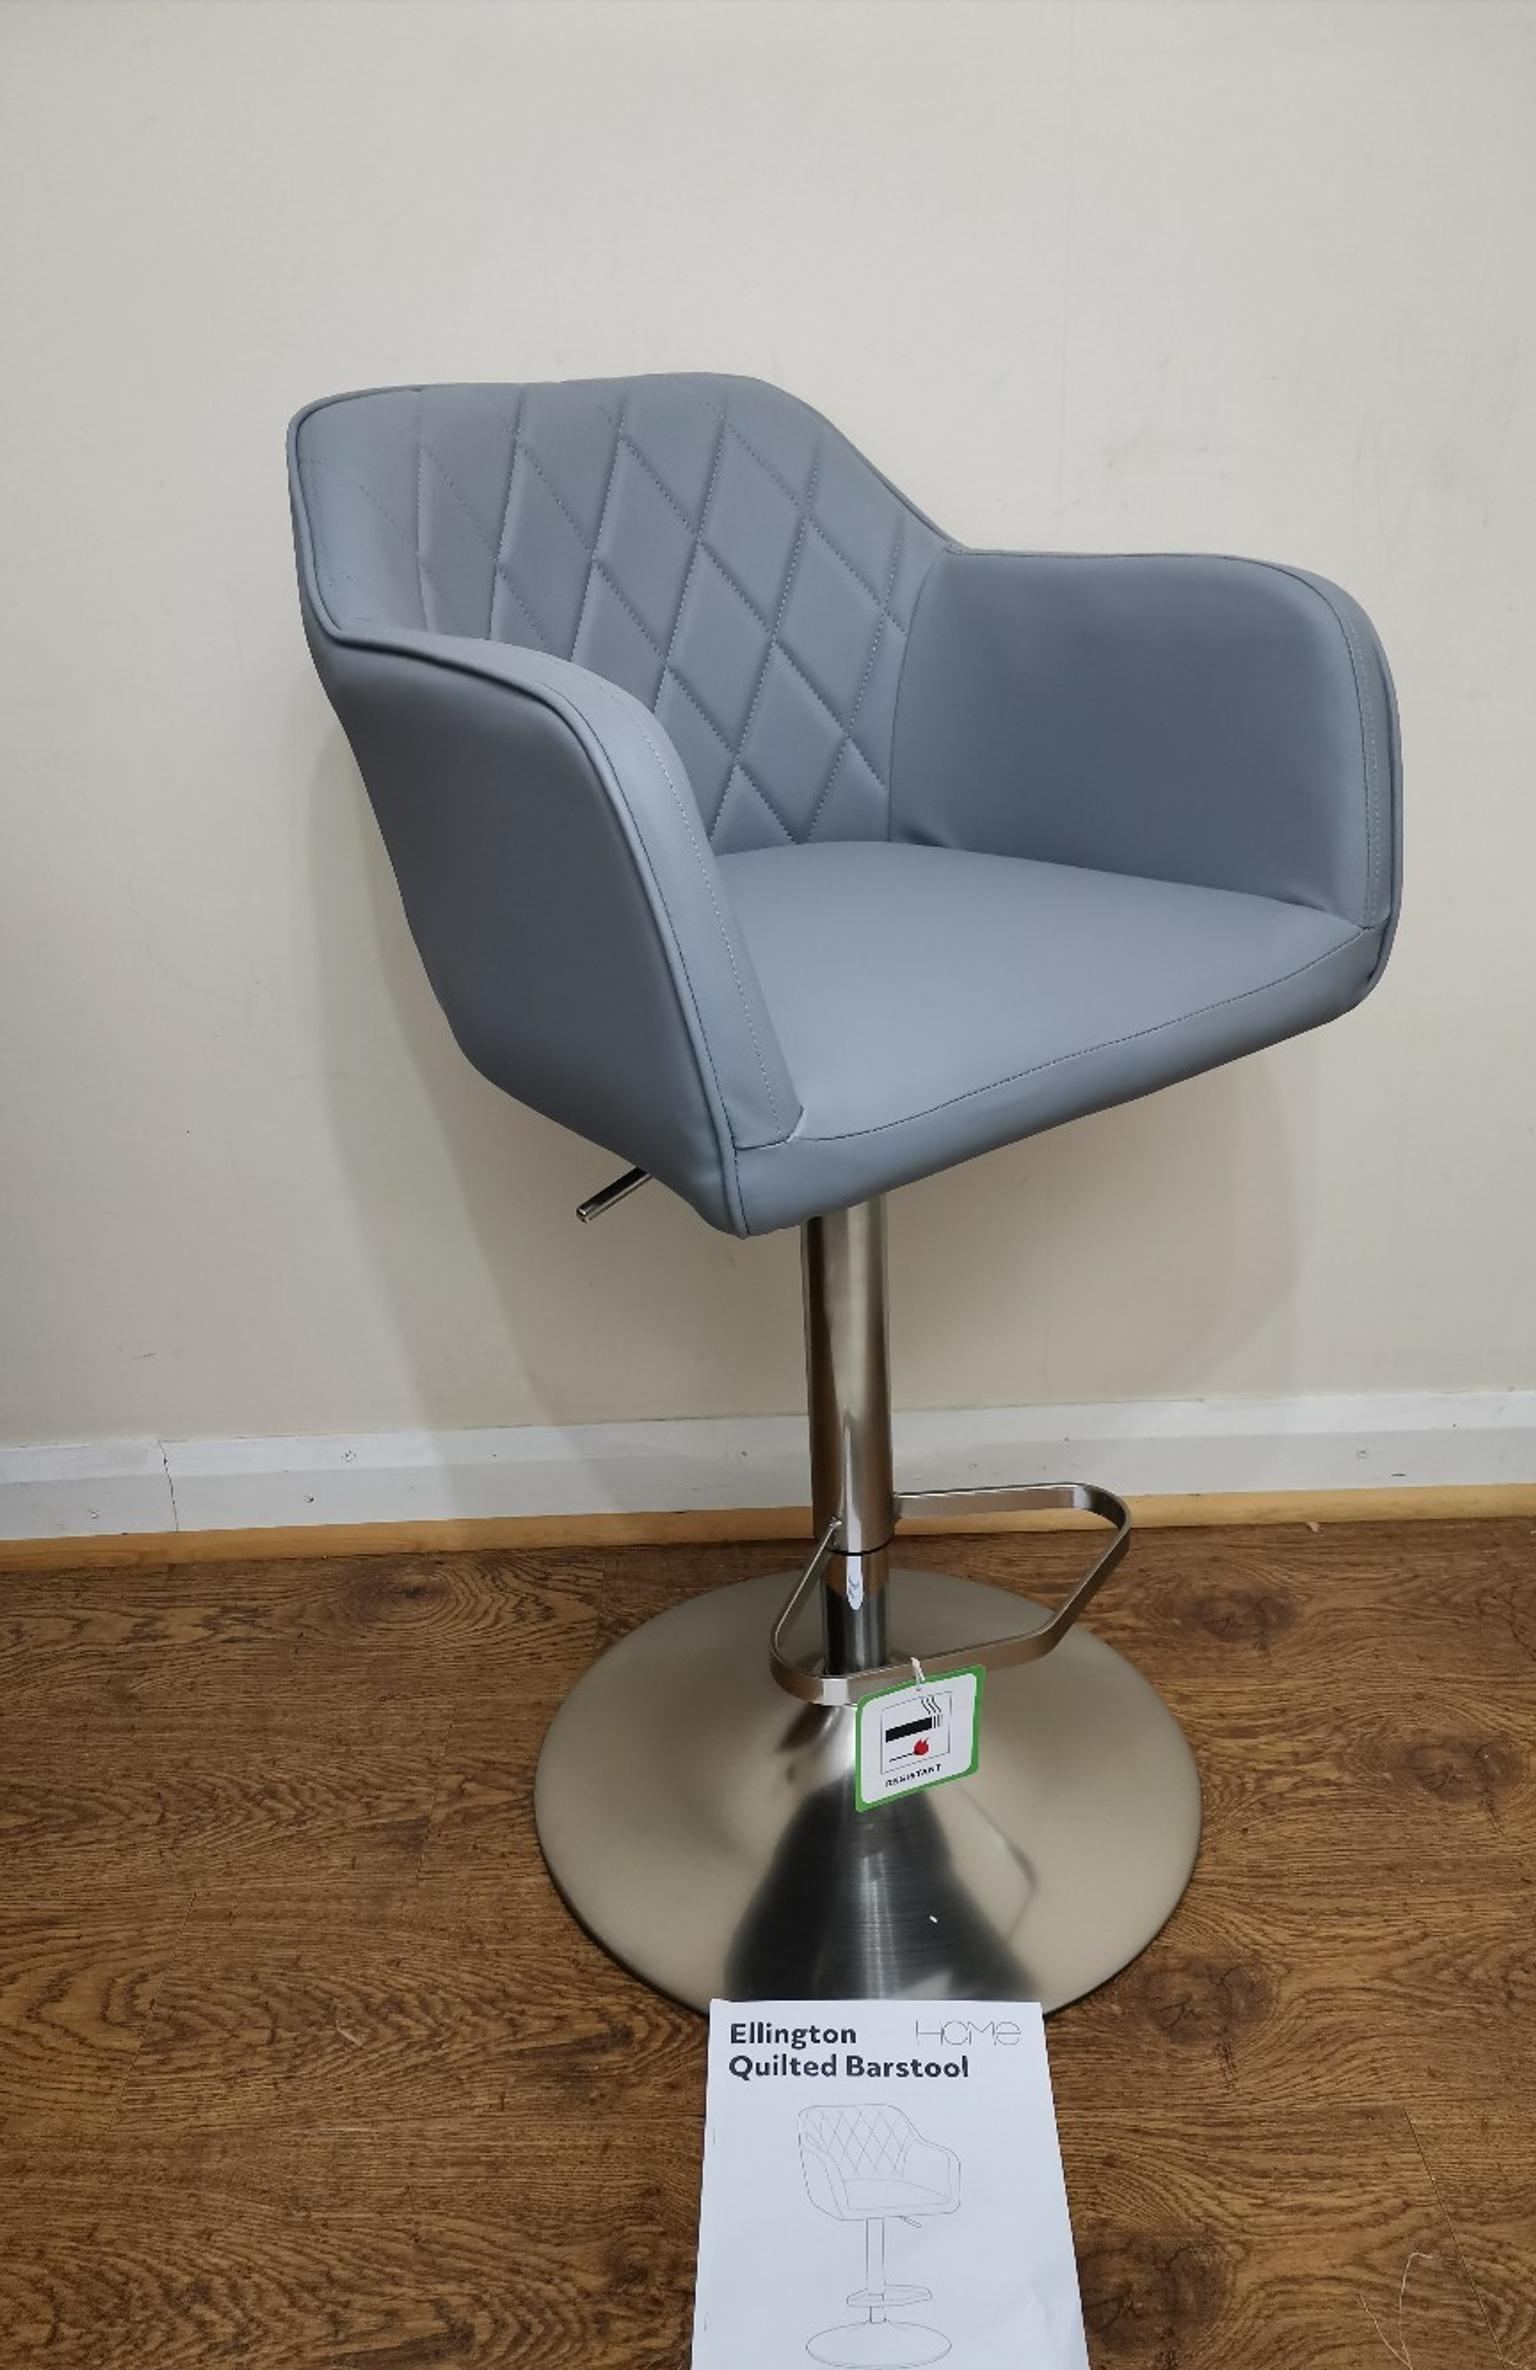 Brand New Ellington Quilted Bar Stool, Quilted Leather Bar Stool